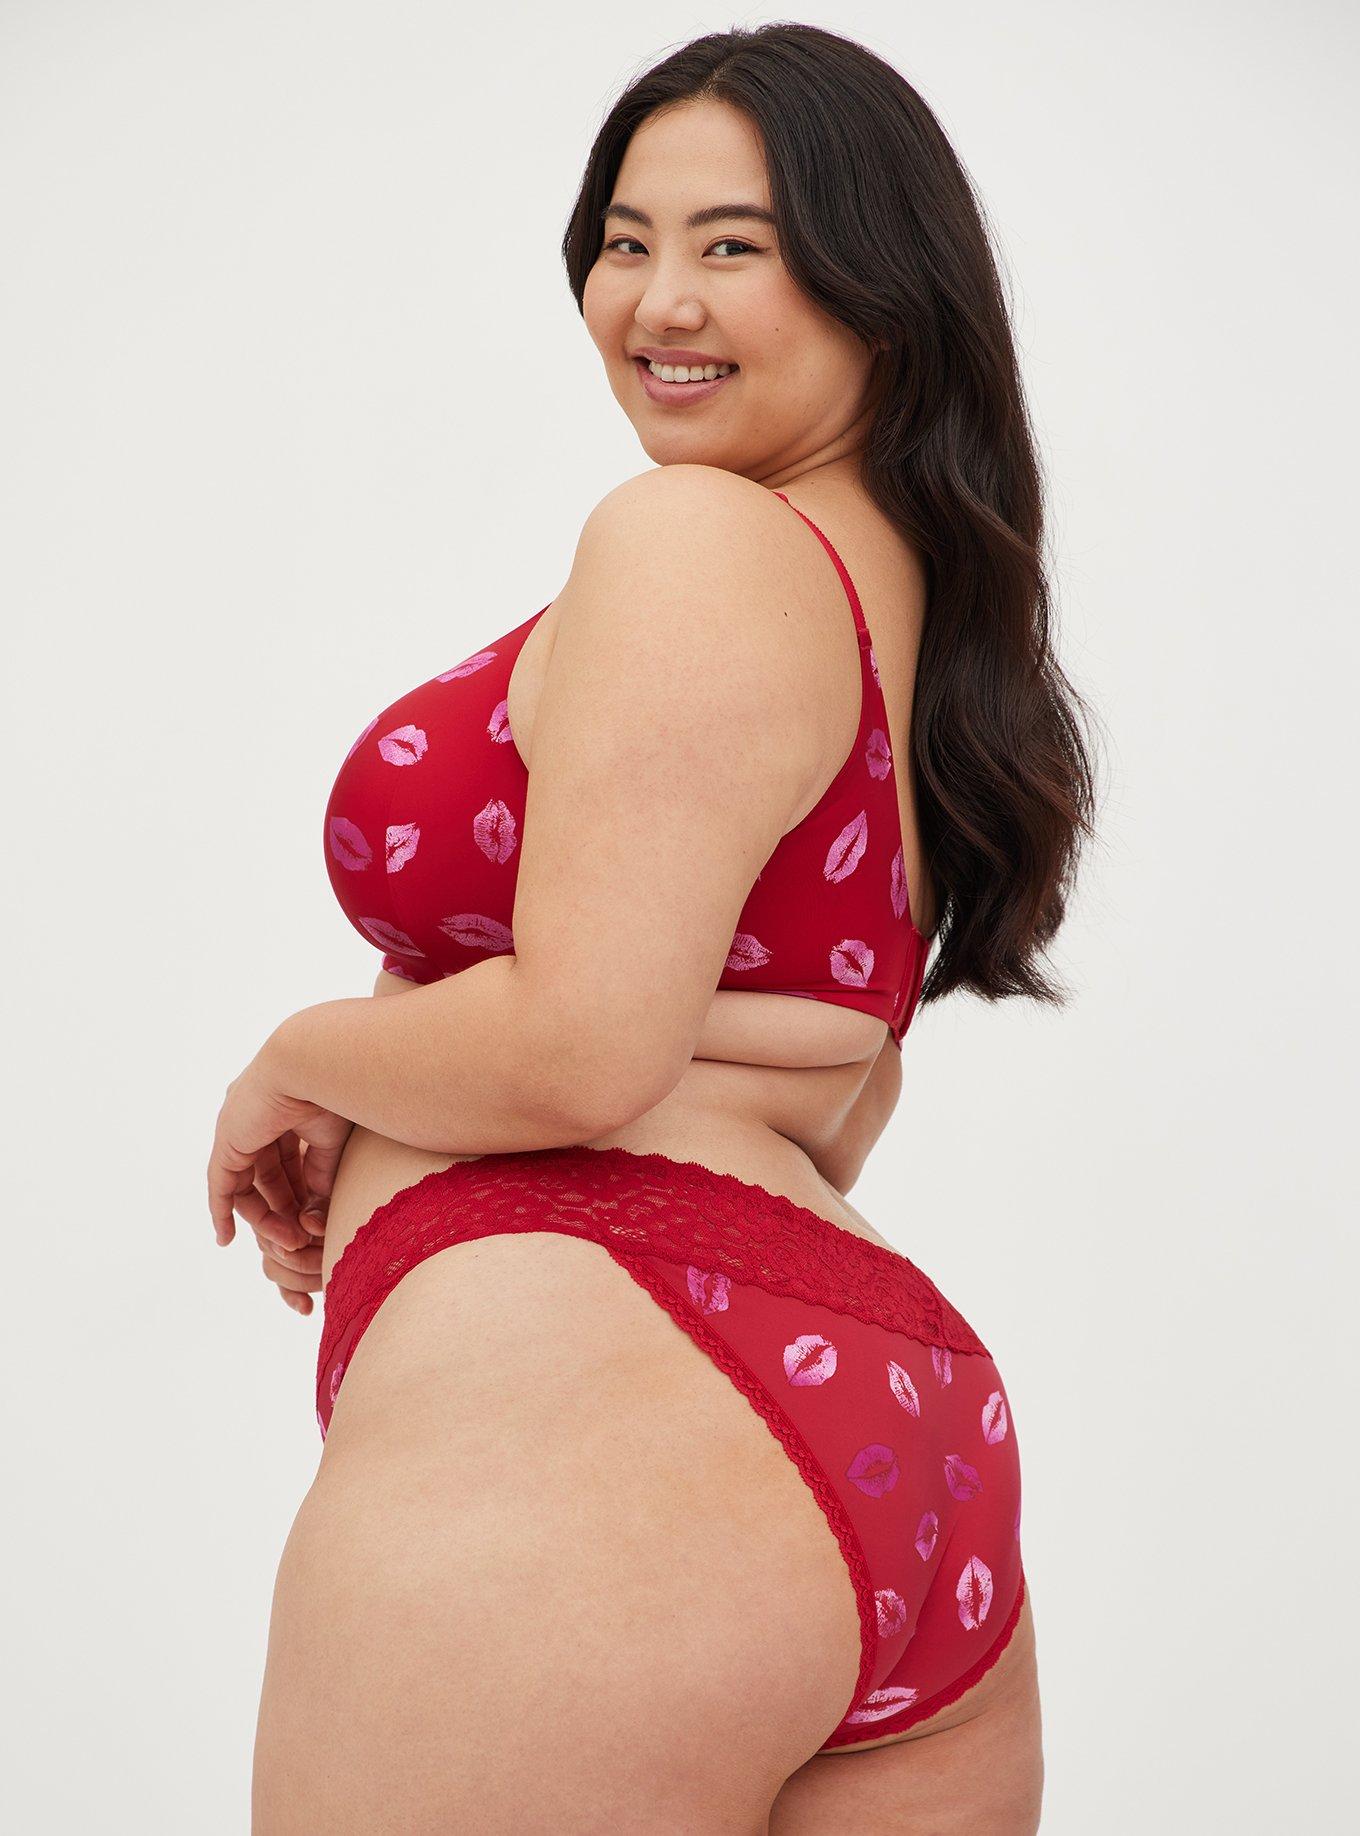 Fat Woman Rear View Opening Taking Off Or Putting On Her Bra. Plus Size  Overweight Female Wearing Lingerie. Bosom, Underwear And Proper Fitting Bras.  Stock Photo, Picture and Royalty Free Image. Image